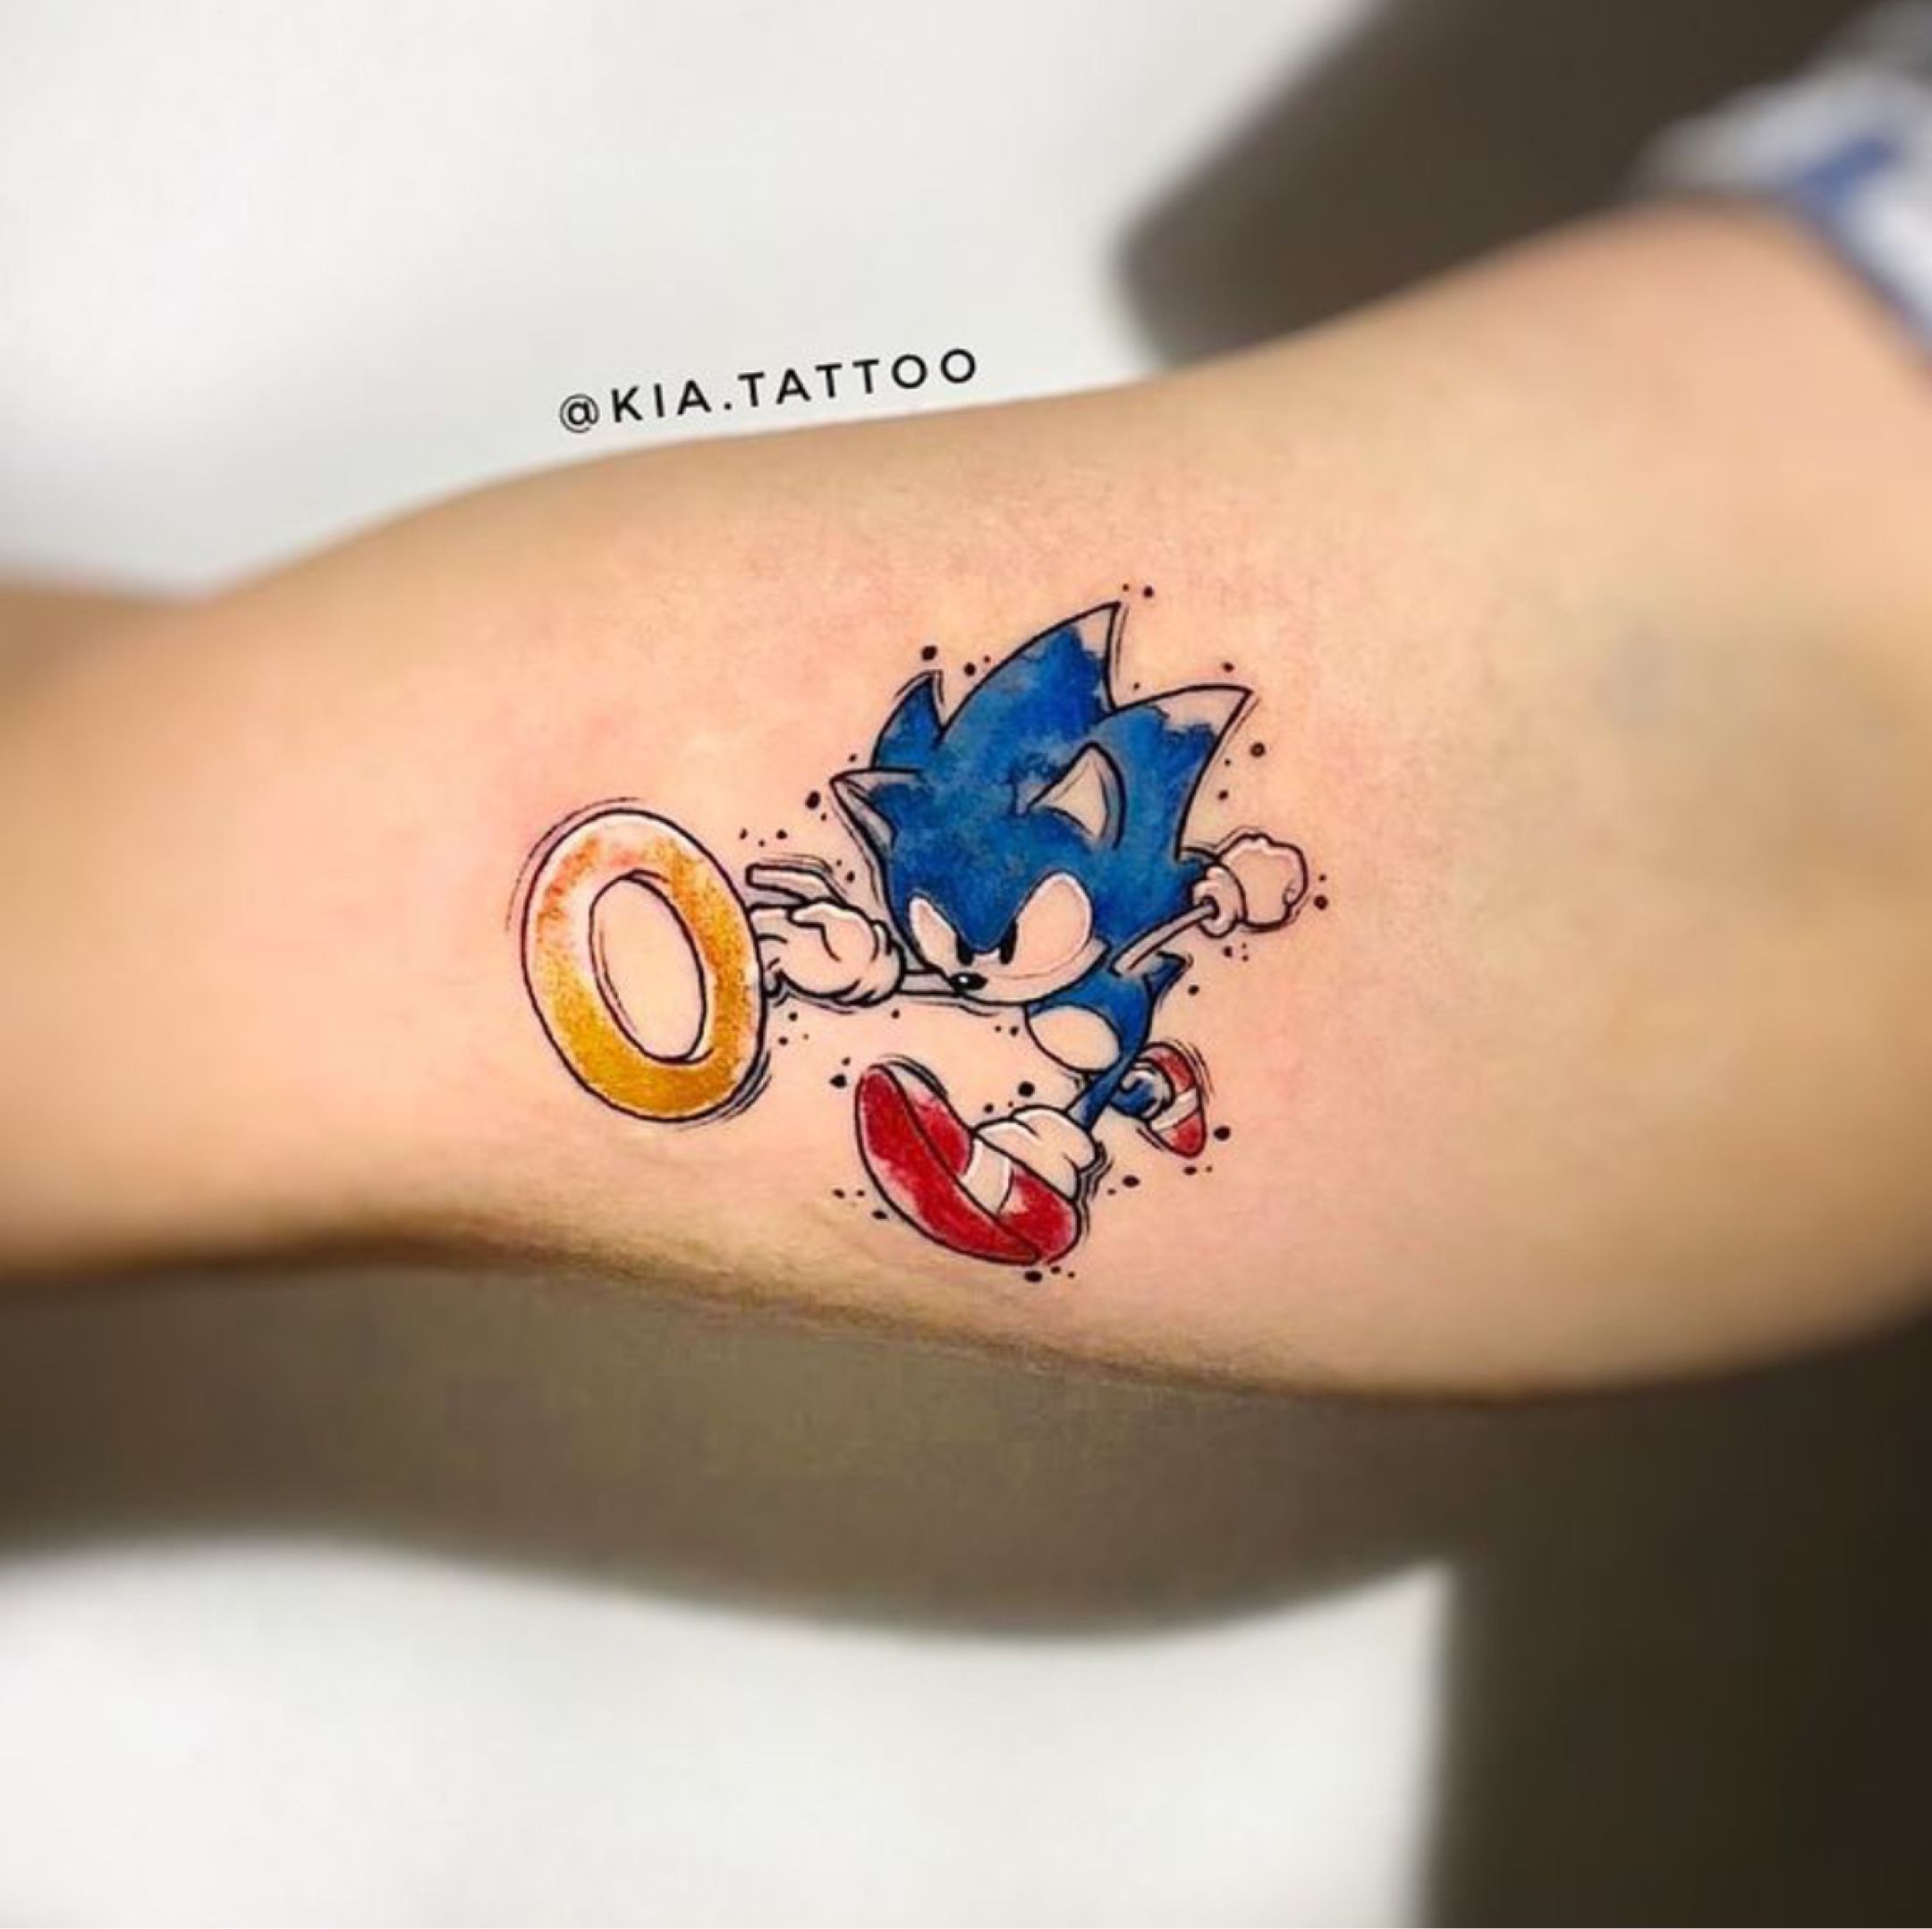 Sonic the Hedgehog themed tattoo by Joshua Ross at Minds Eye Tattoo in  Emmaus Pa httpswwwfacebook  Hedgehog tattoo Disney sleeve tattoos  Disney tattoos